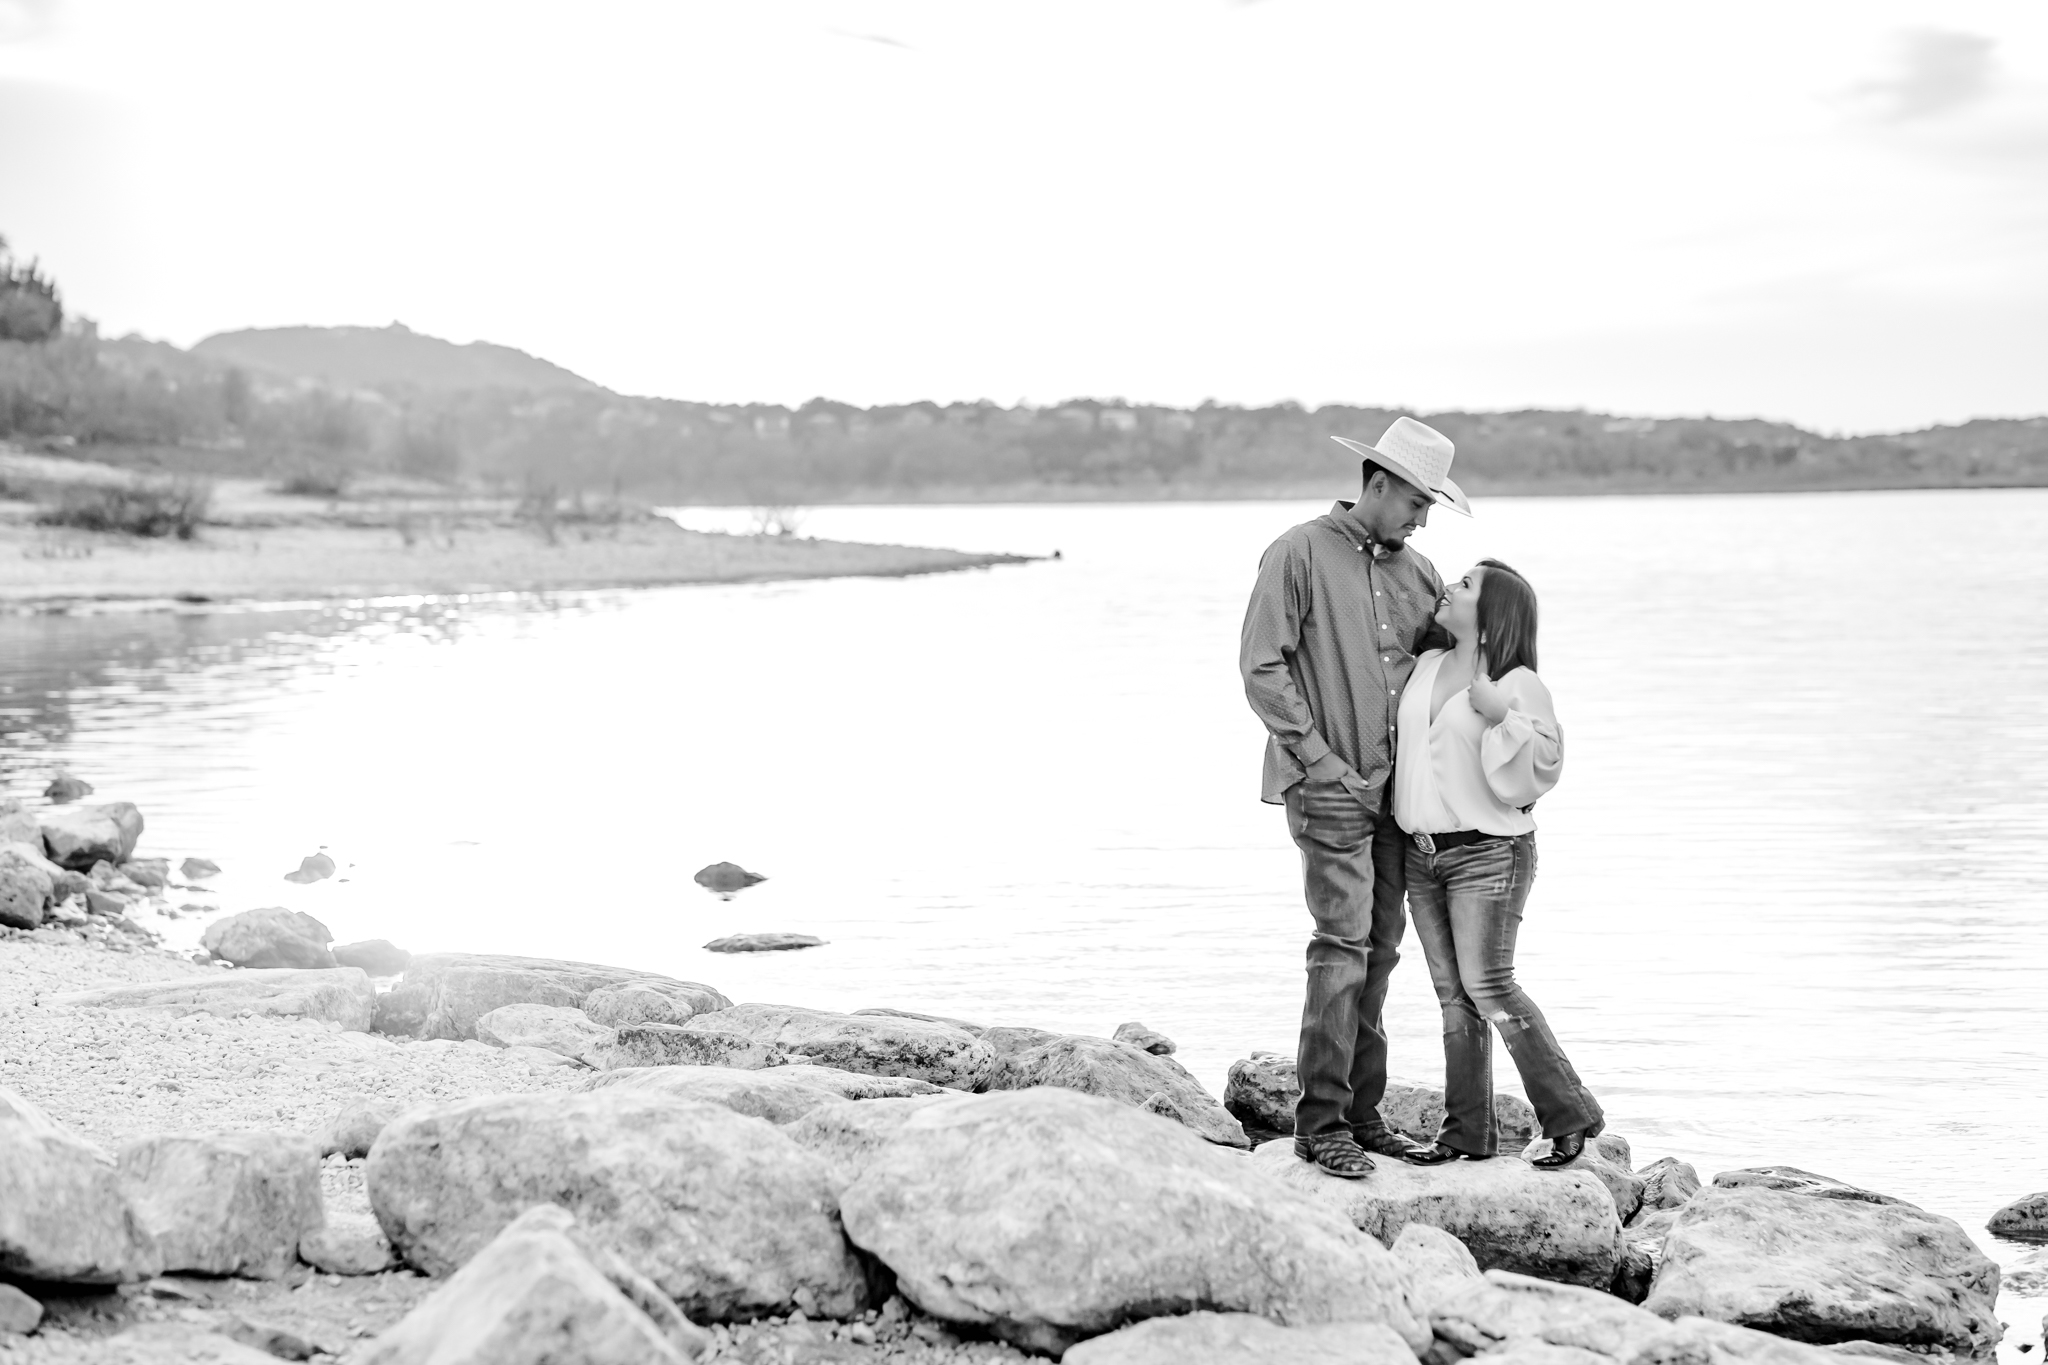 Engagement Session at Overlook Park in Canyon Lake, TX by Dawn Elizabeth Studios, San Antonio Wedding photographer